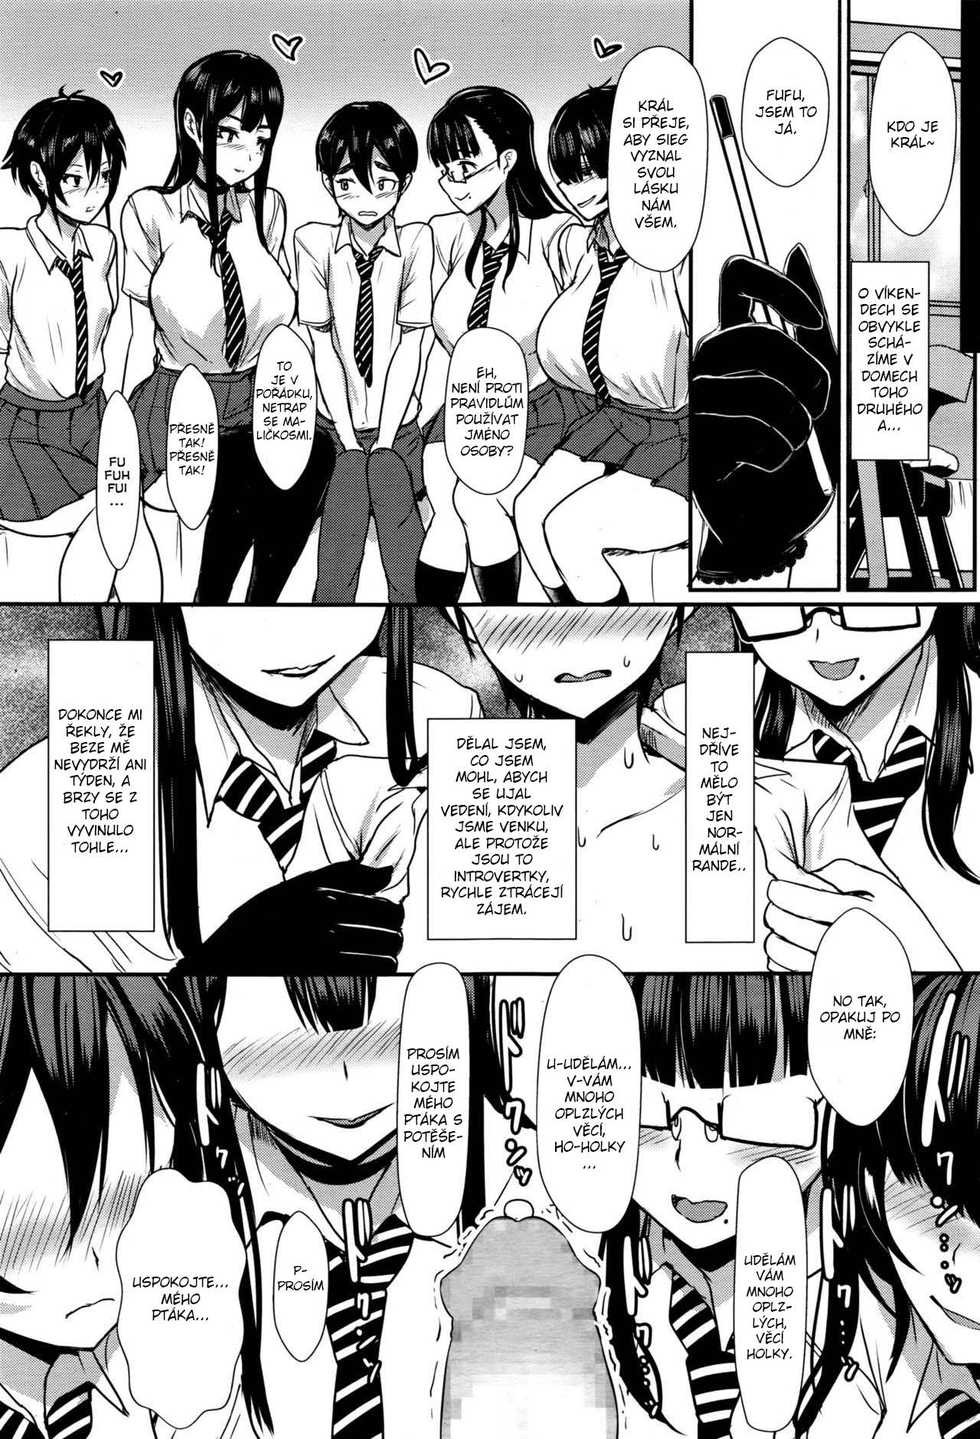 [Miyamoto Issa] Hikage no Sono e Youkoso | Welcome to the Shadow Garden (Girls forM Vol. 12) [Czech] [Heart♥] - Page 15